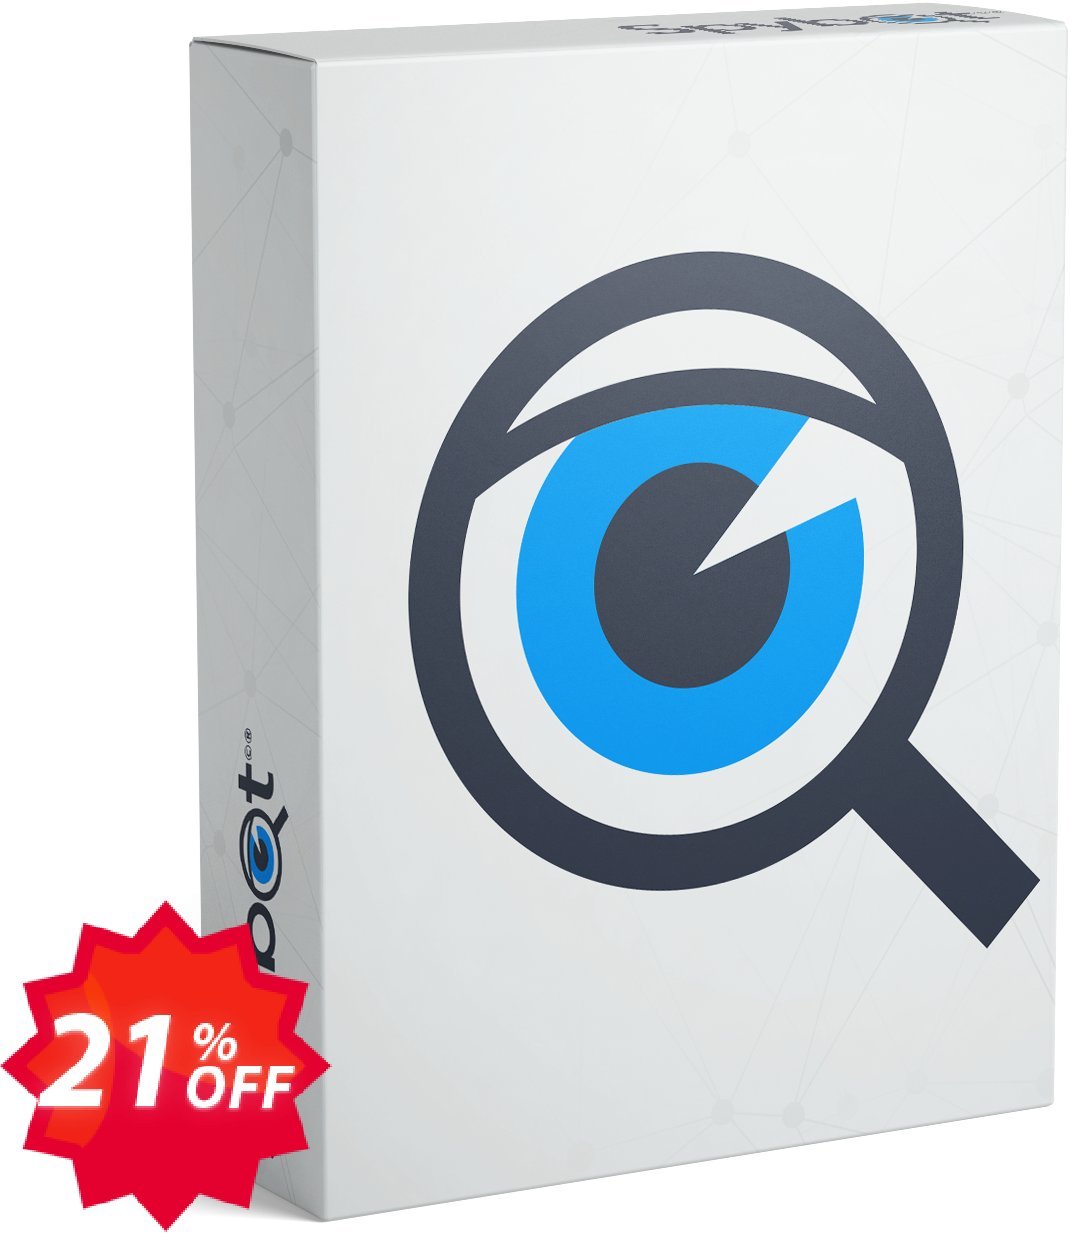 Spybot Professional Edition Coupon code 21% discount 